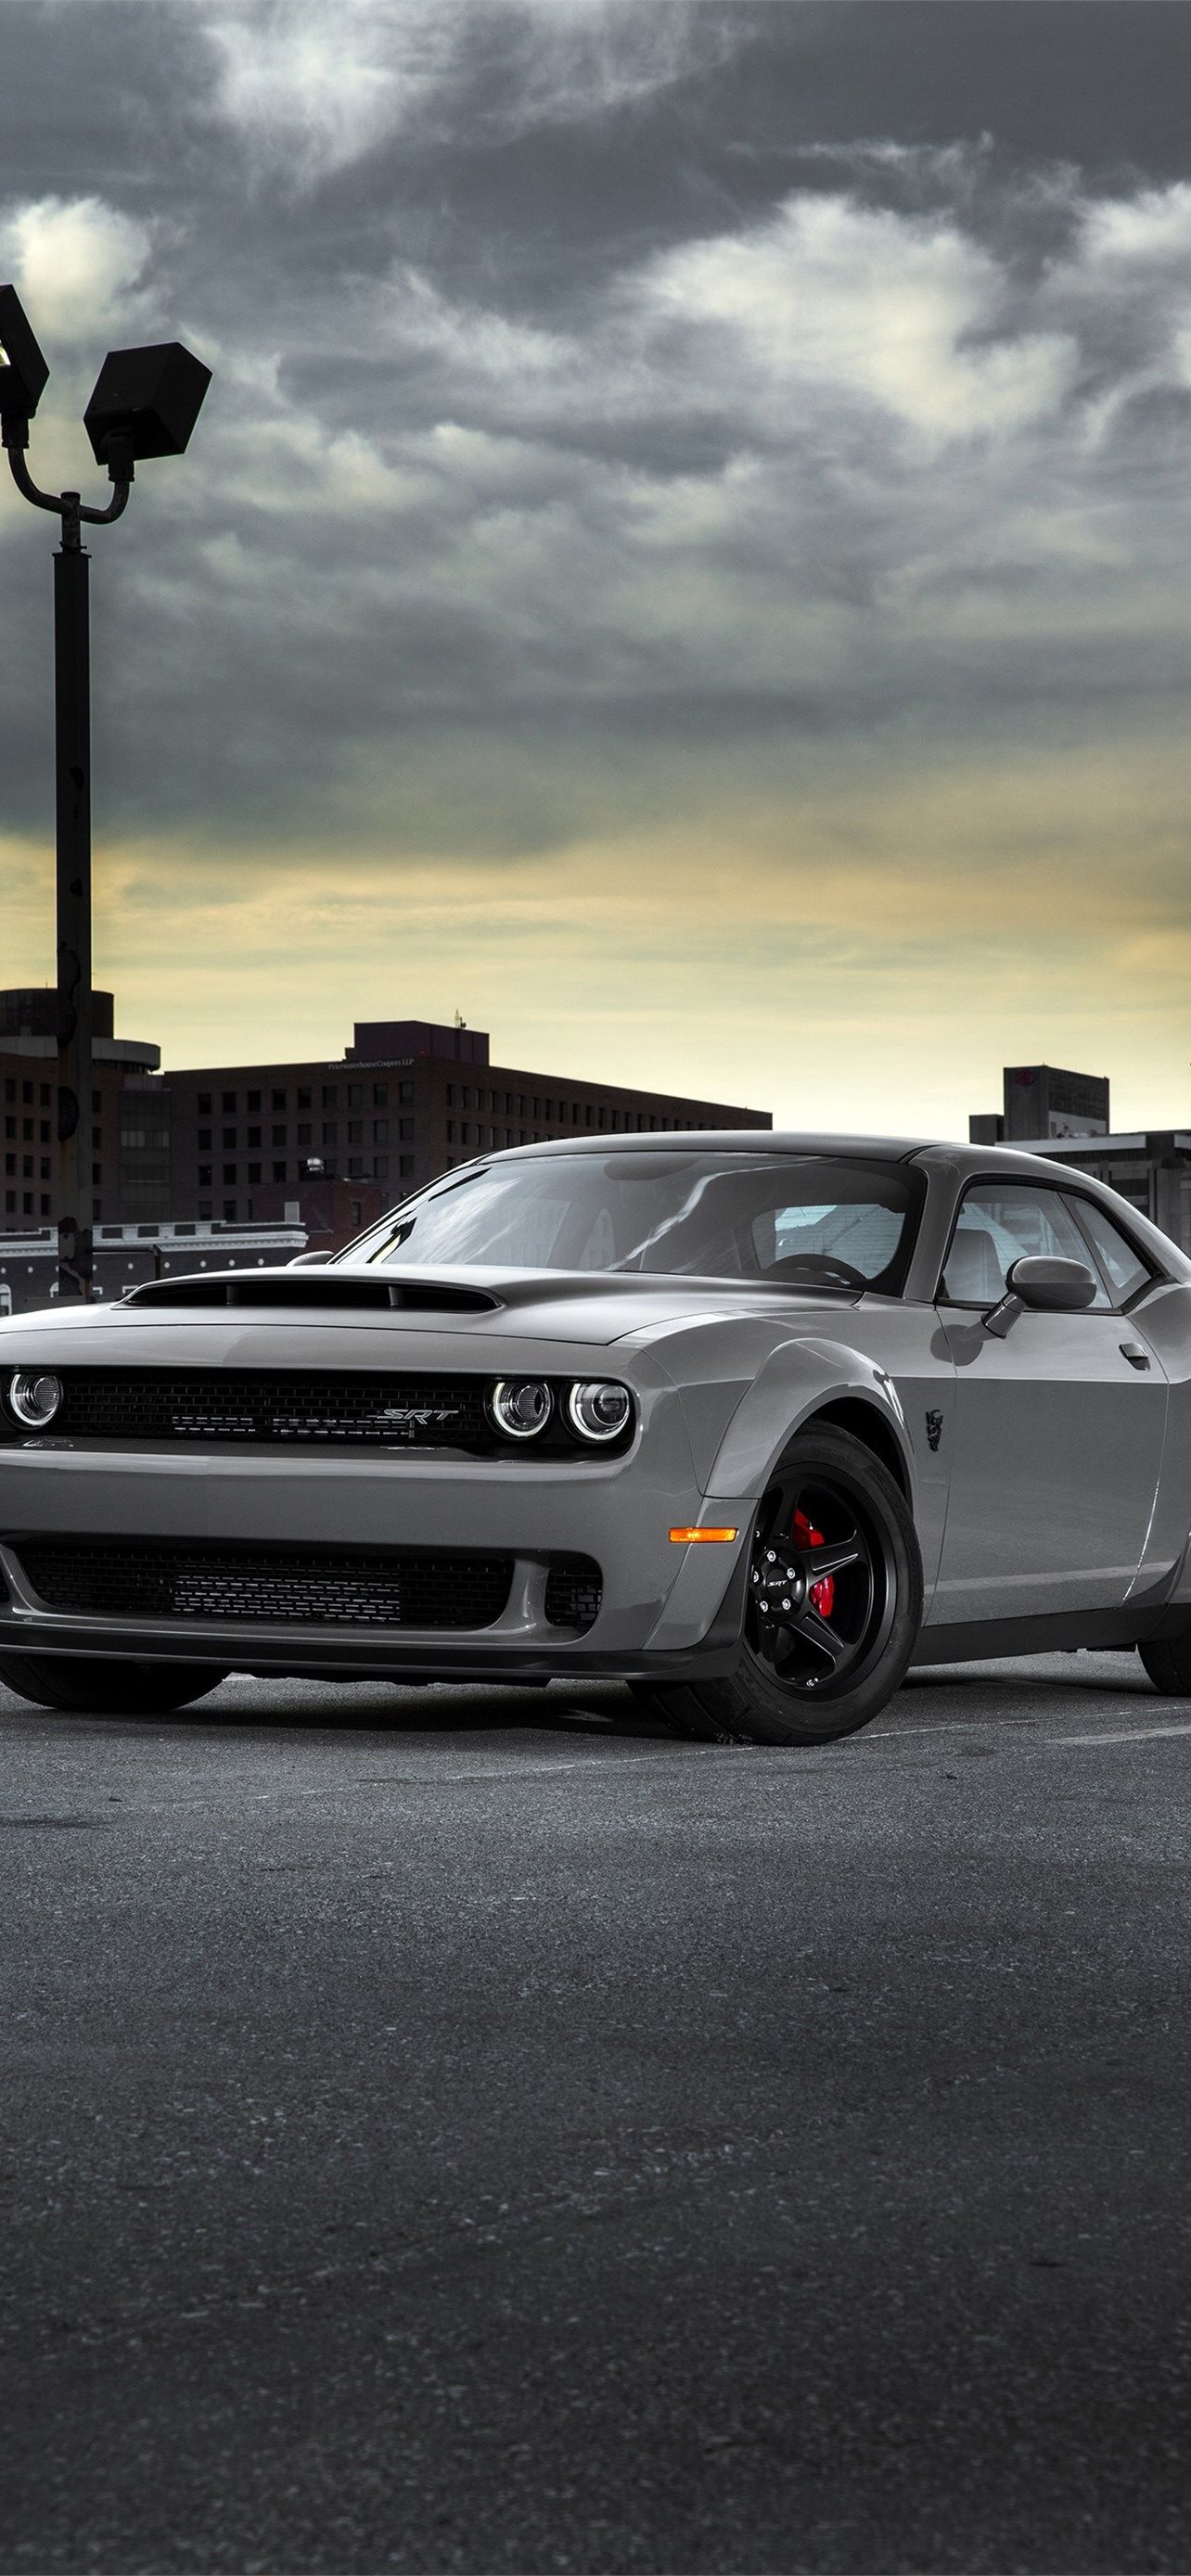 1415489 dodge challenger, cars, hd, 4k - Rare Gallery HD Wallpapers